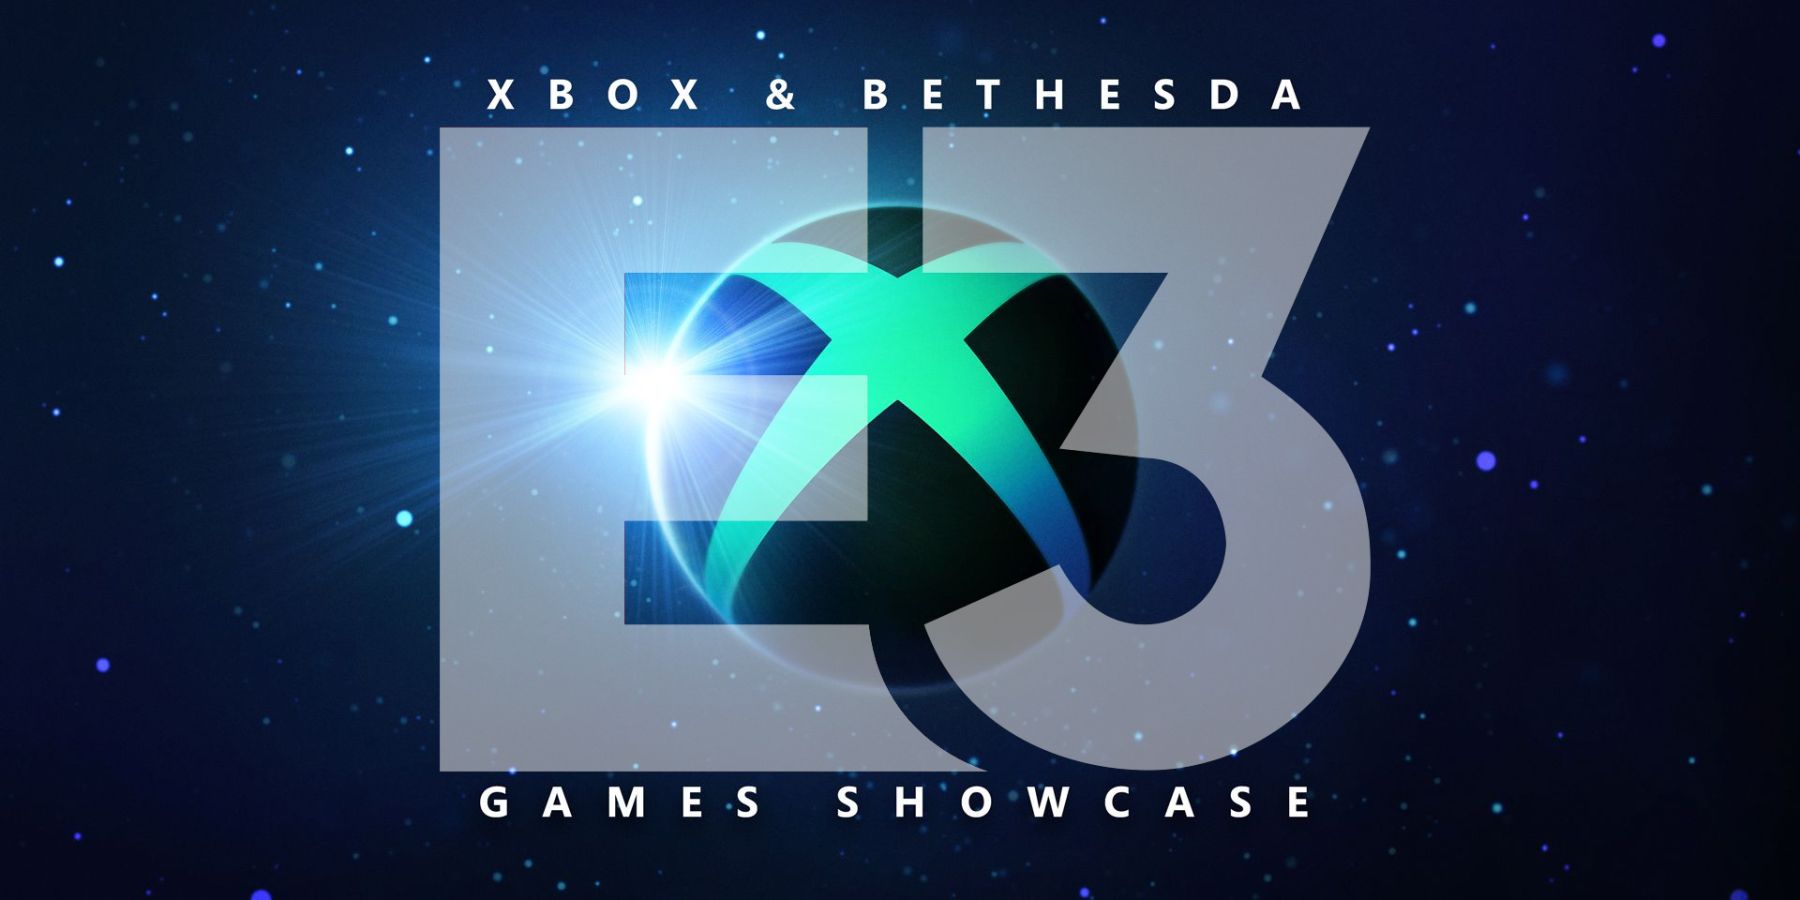 Xbox and Bethesda having a games showcase on the date Microsoft usually uses for its E3 conference shows the industry won't move on completely from the fading trade show